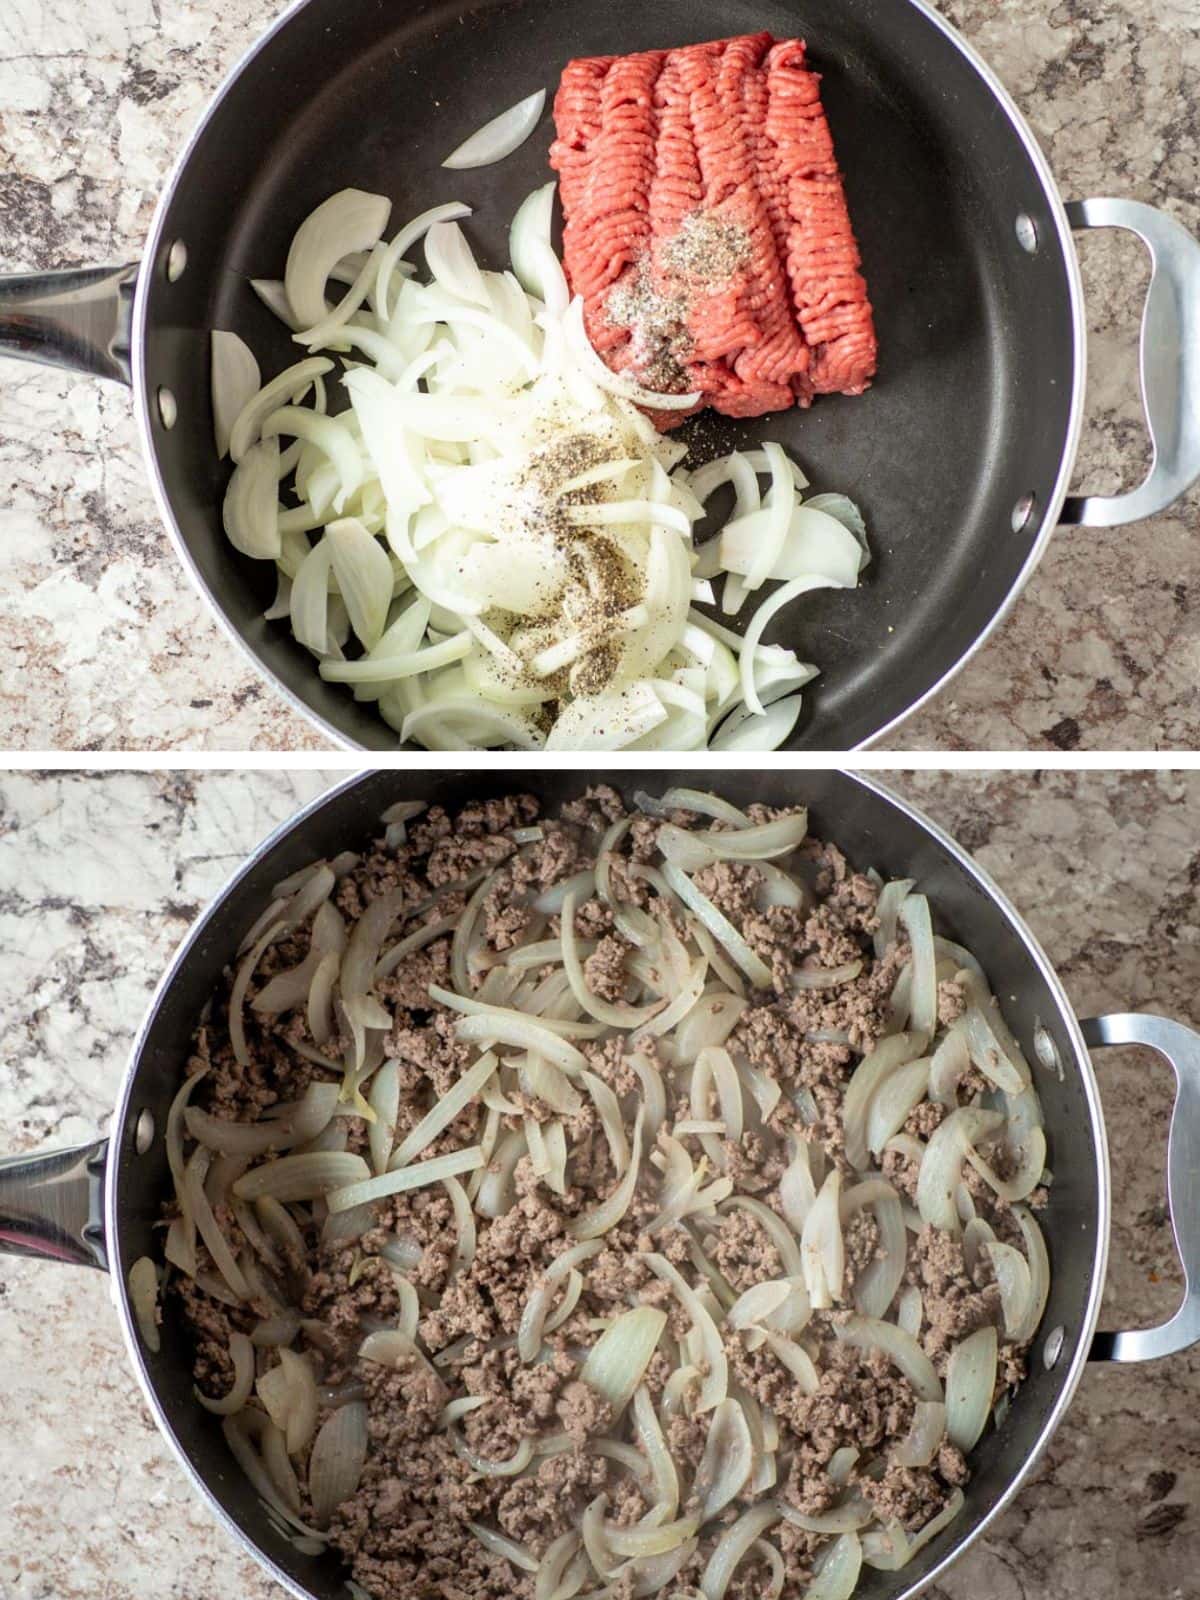 Beef and sliced onions cooked together in a skillet.